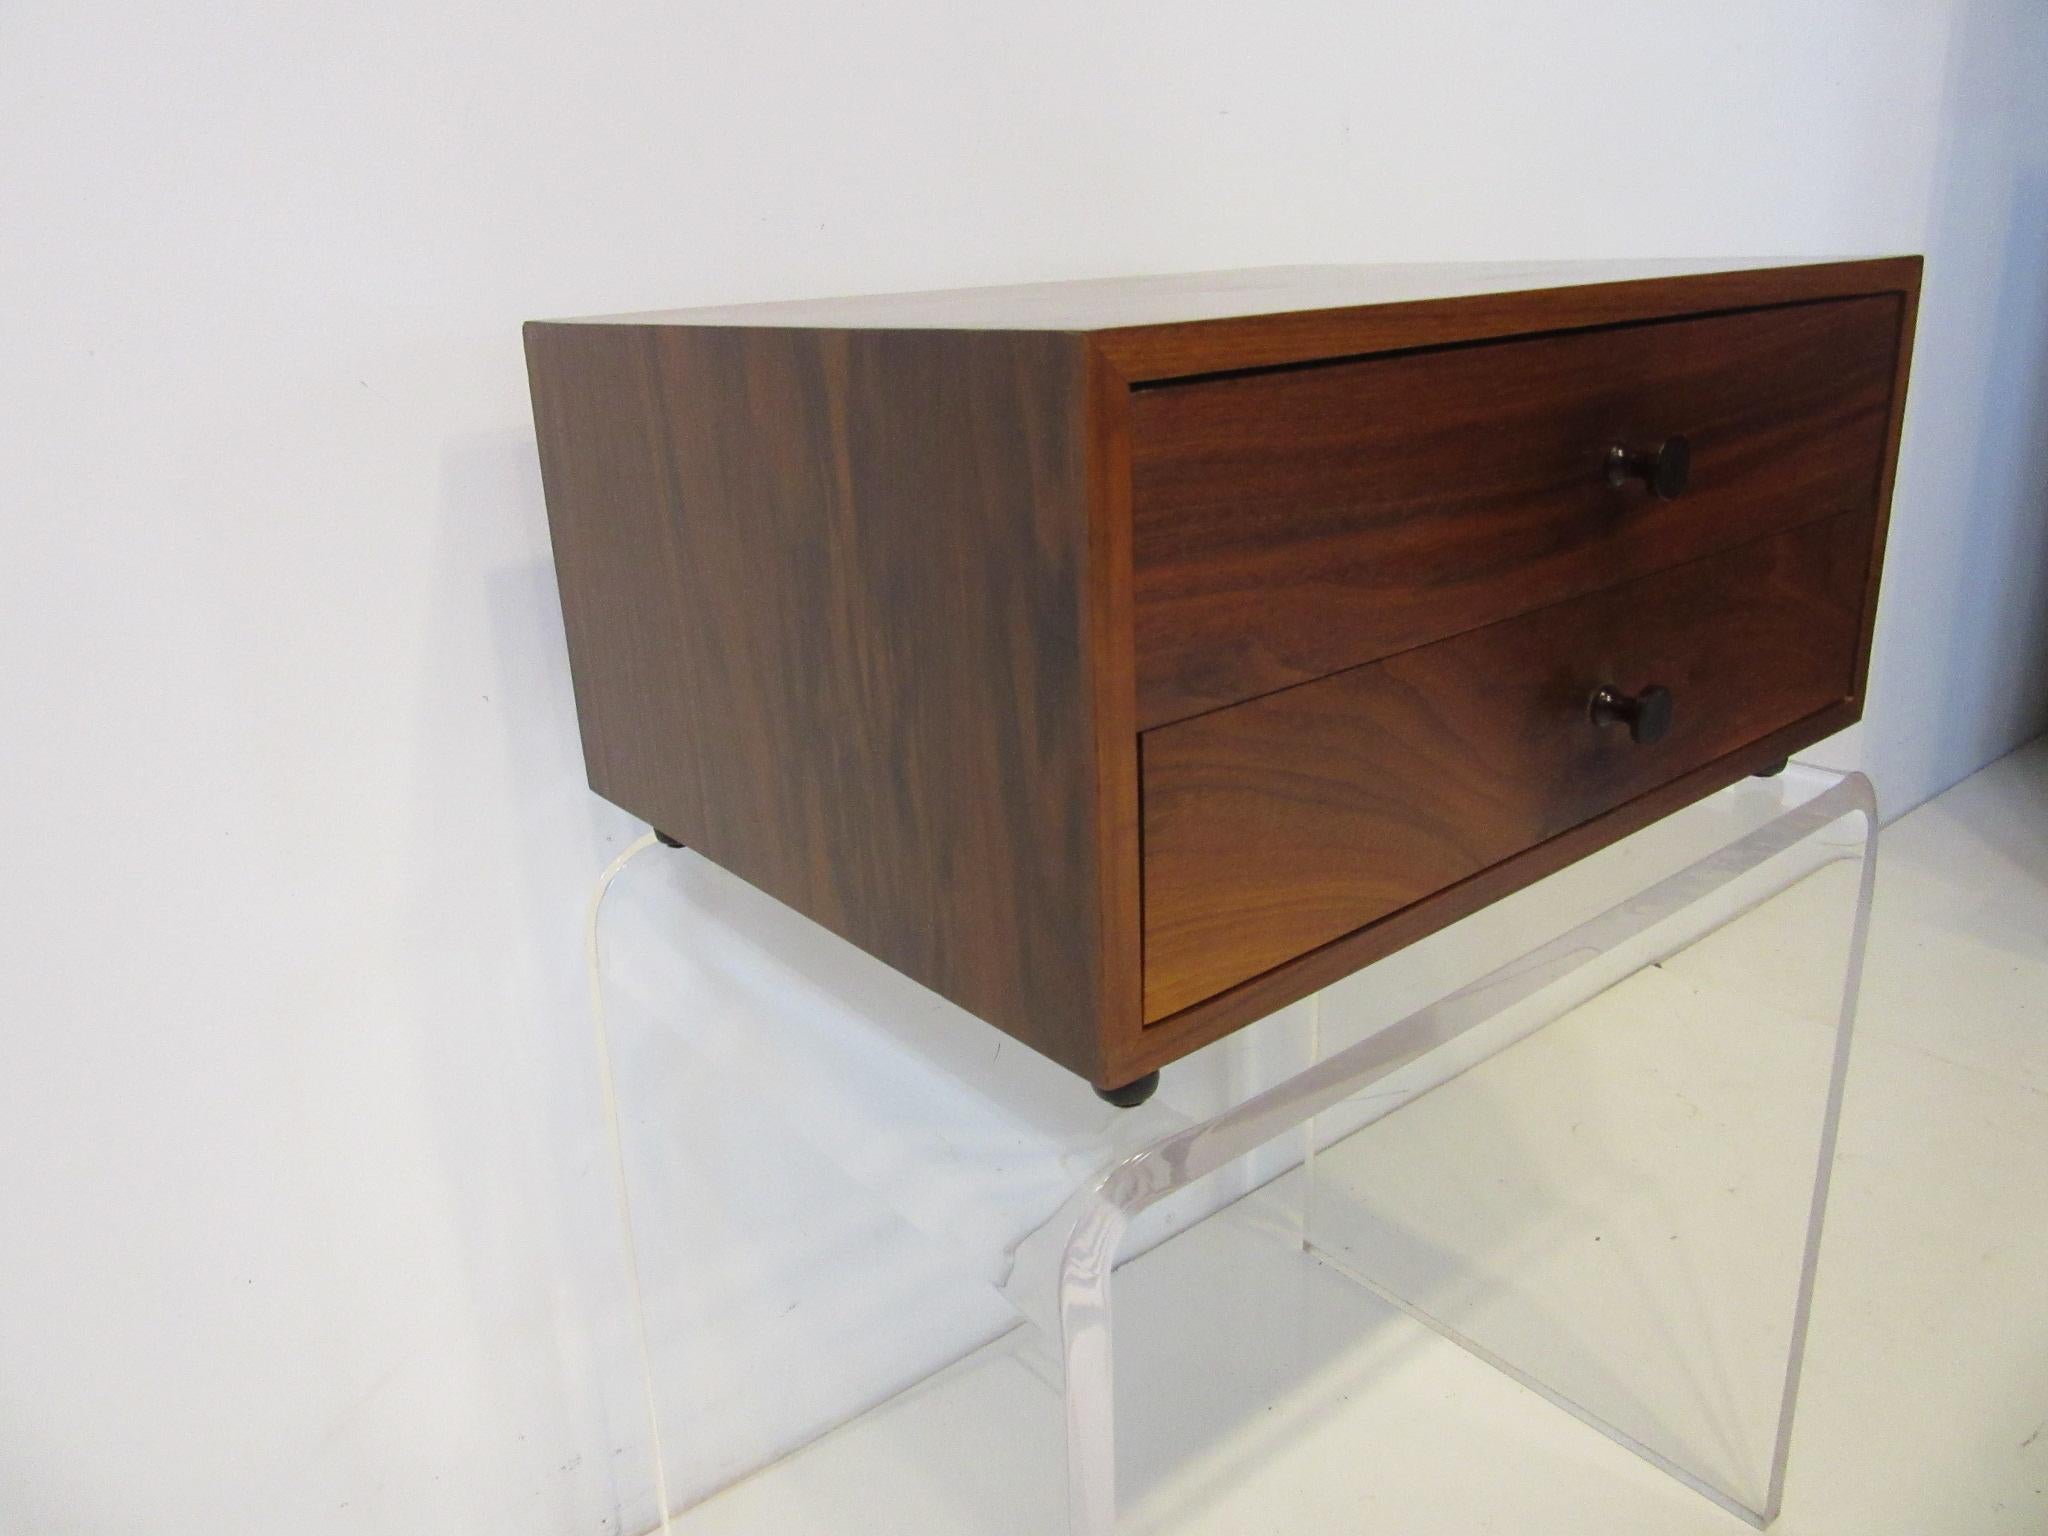 A two drawer rosewood Jewelry or watch box with darker turned rosewood pulls sits on black satin cast legs. This very well crafted piece has dovetail construction inside using birch wood and can be used on top of a dresser or in your dressing area,